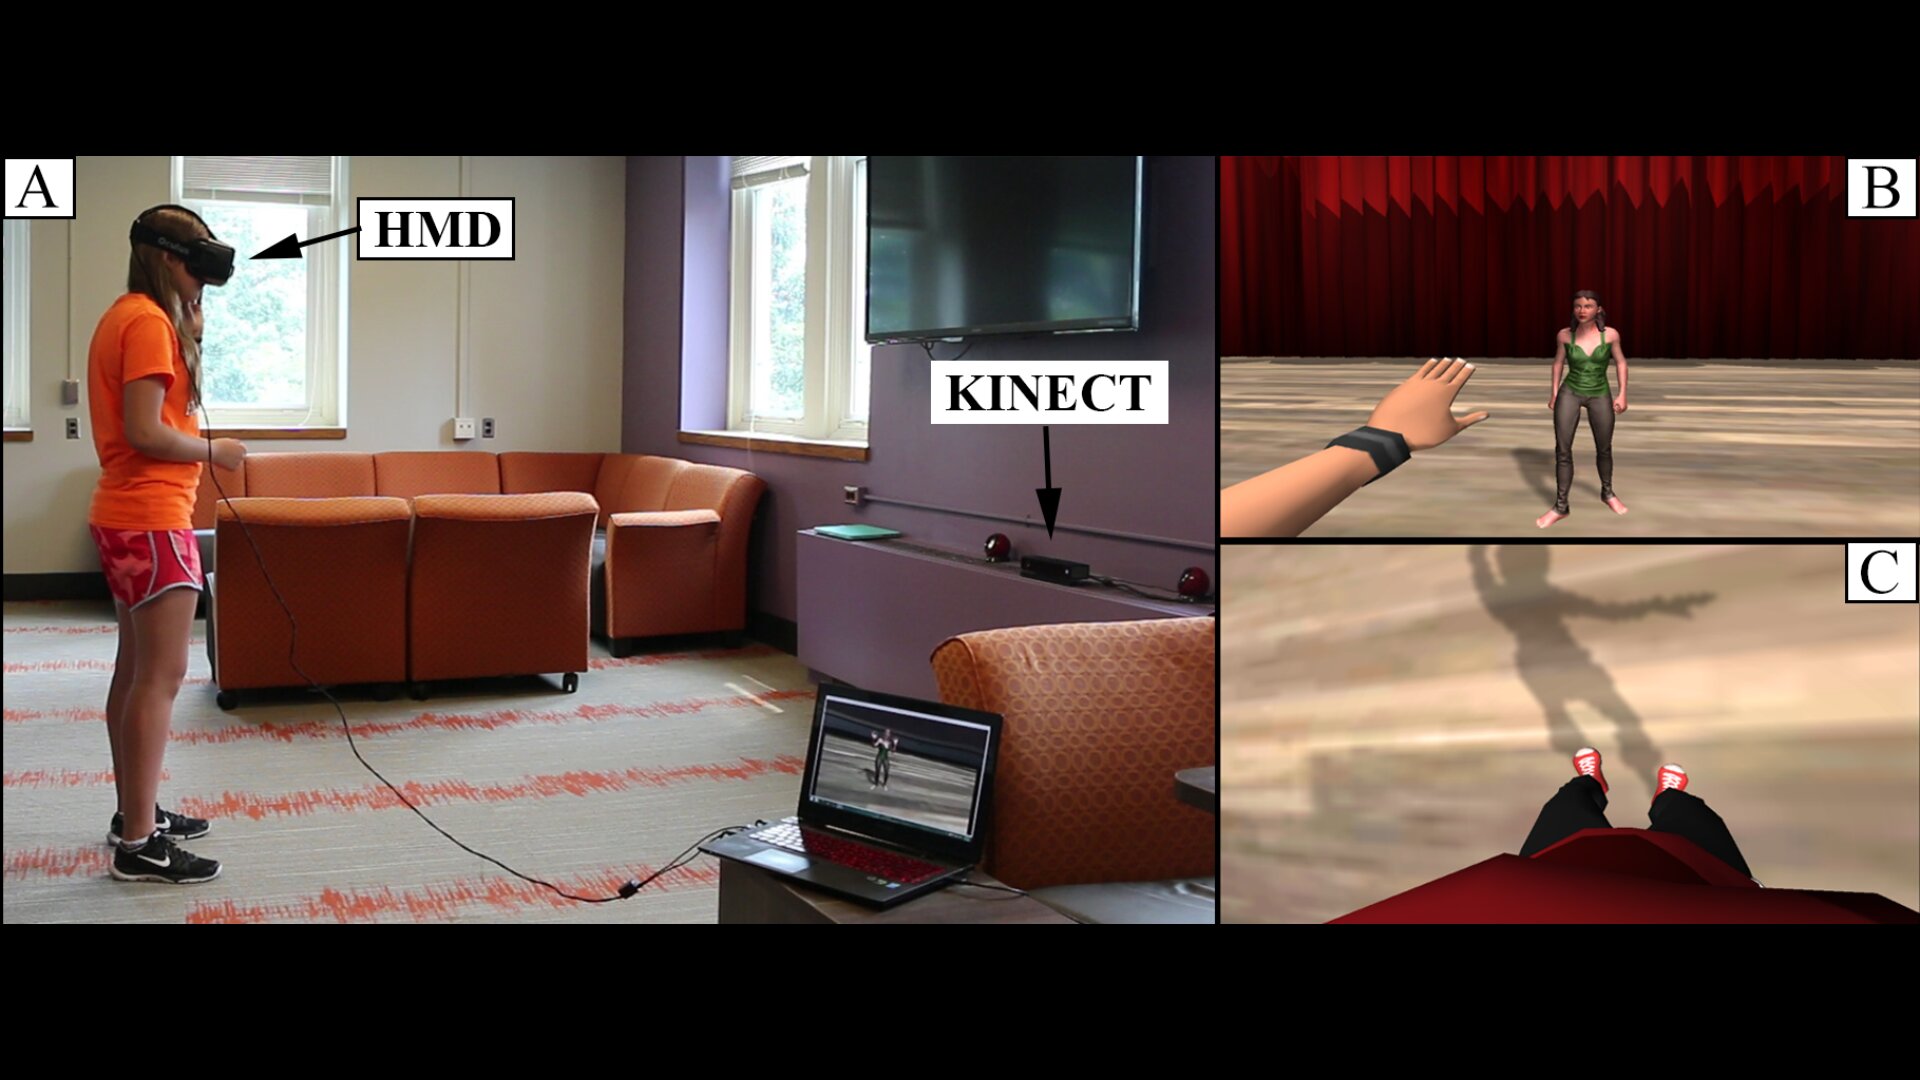 The VR setup for VEnvI, using the Oculus Rift head-mouted display and a Microsoft Kinect.